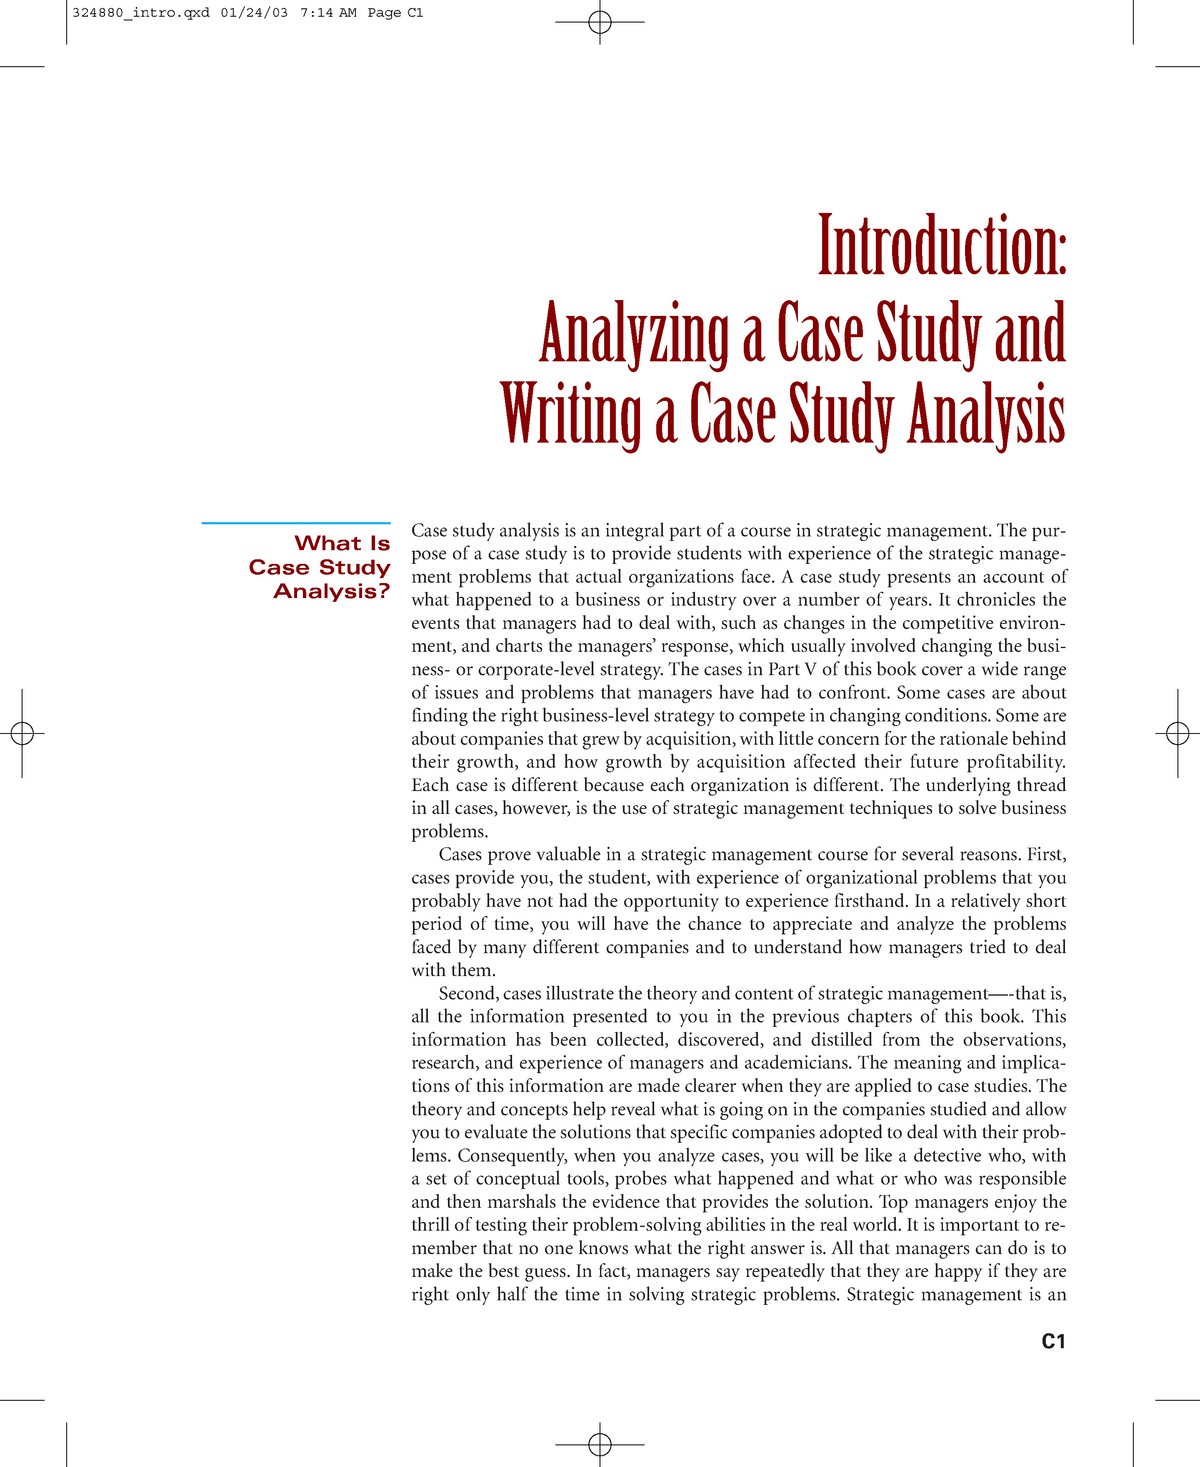 introduction of the case study